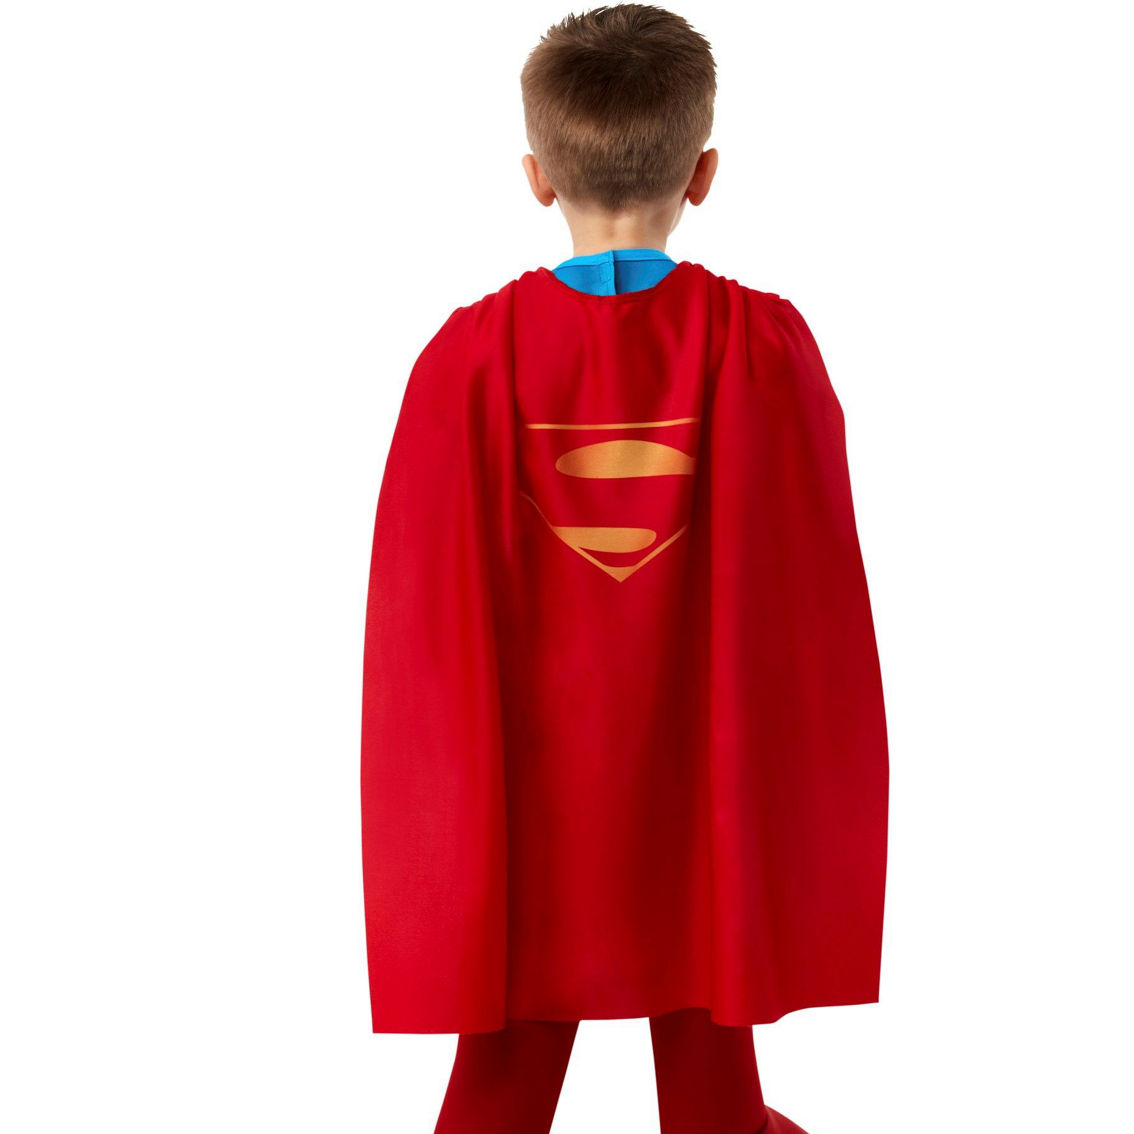 DC League of Super Pets: Superman Toddler Costume - Image 3 of 4